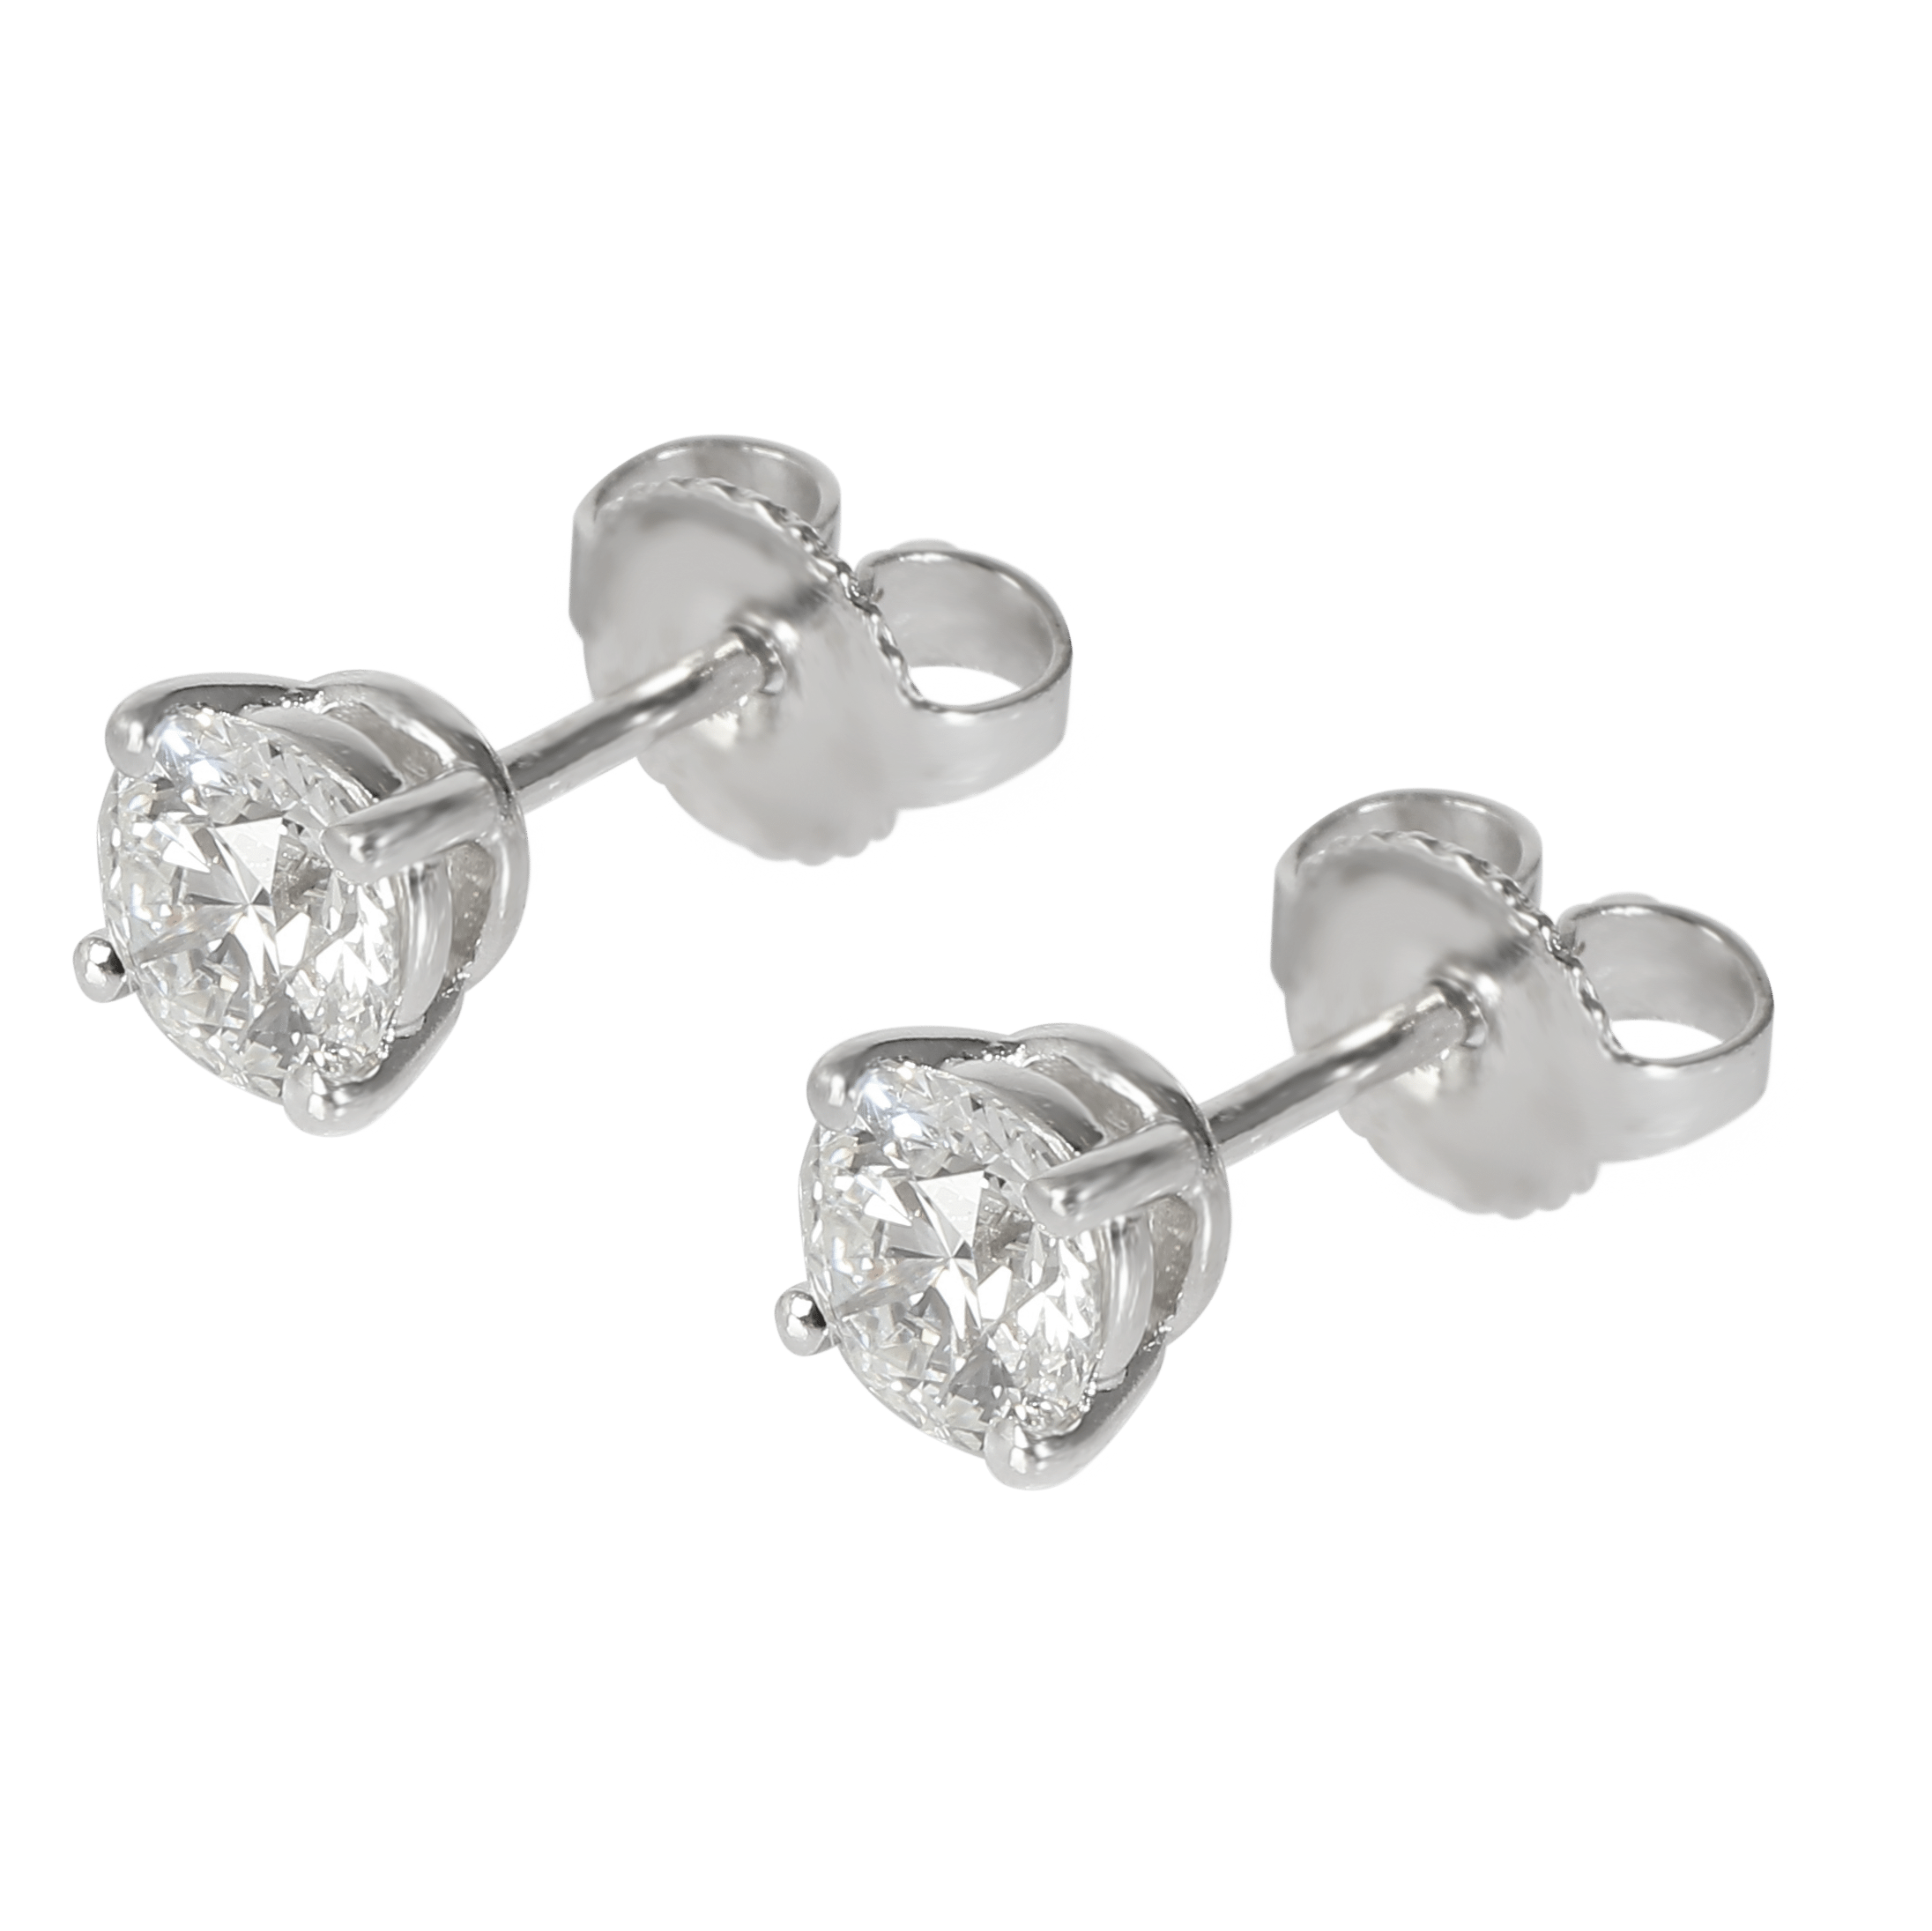 Tiffany & Co. Tiffany & Co. Diamond Collection Stud Earrings in Platinum I VS1 0.94 Ctw